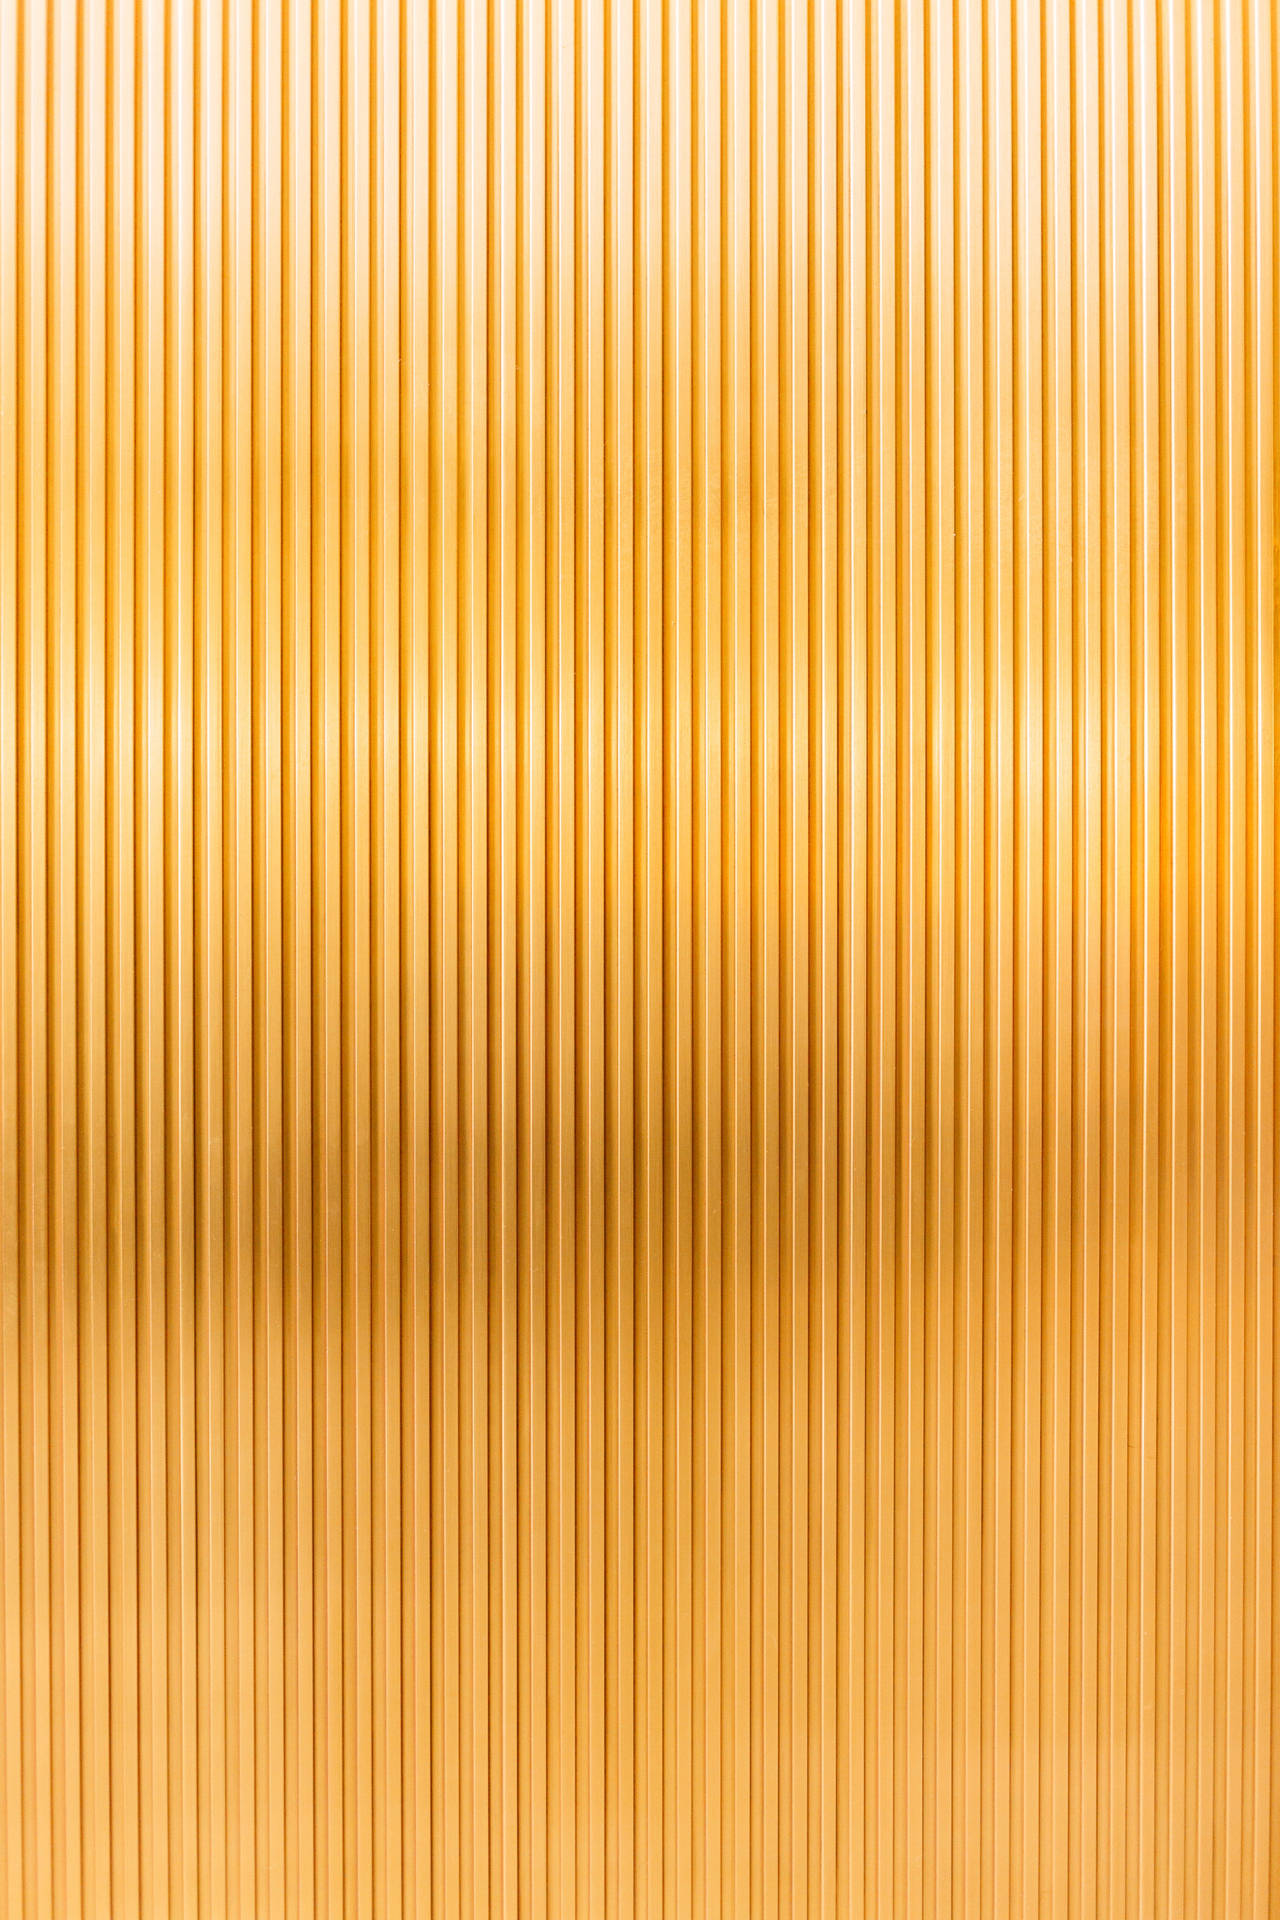 Consistent Vertical Lines In Gold Texture Background